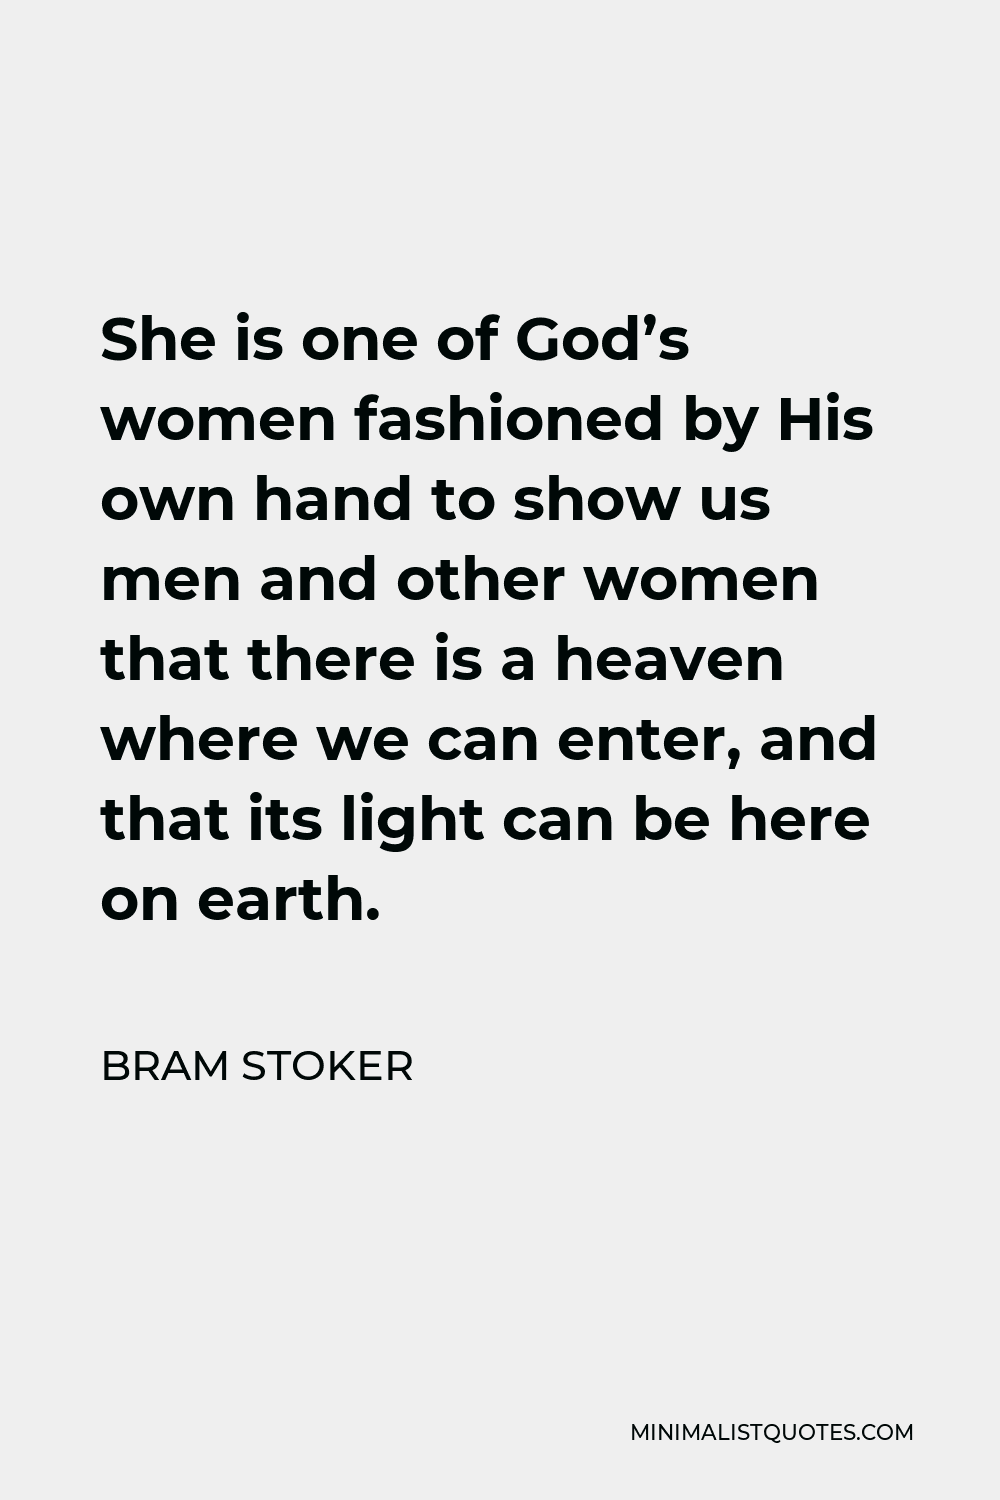 Bram Stoker Quote - She is one of God’s women fashioned by His own hand to show us men and other women that there is a heaven where we can enter, and that its light can be here on earth.